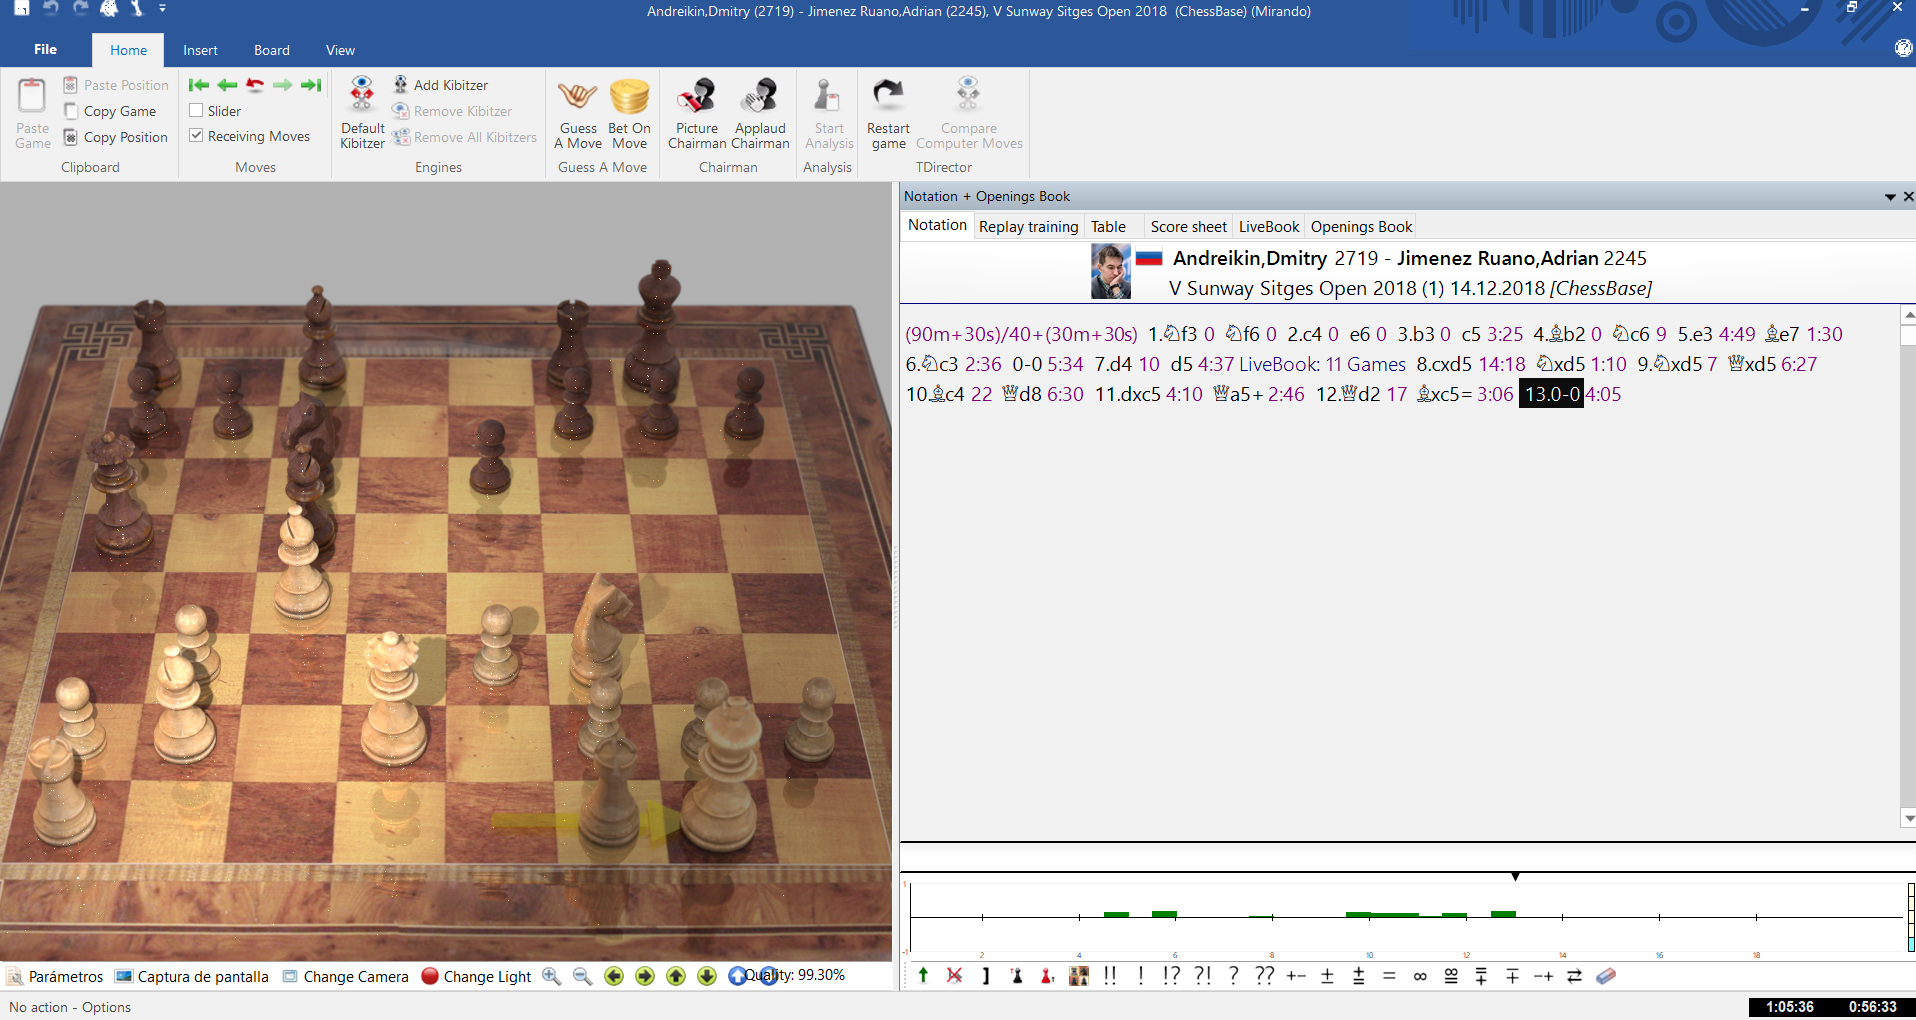 Live broadcast on Playchess